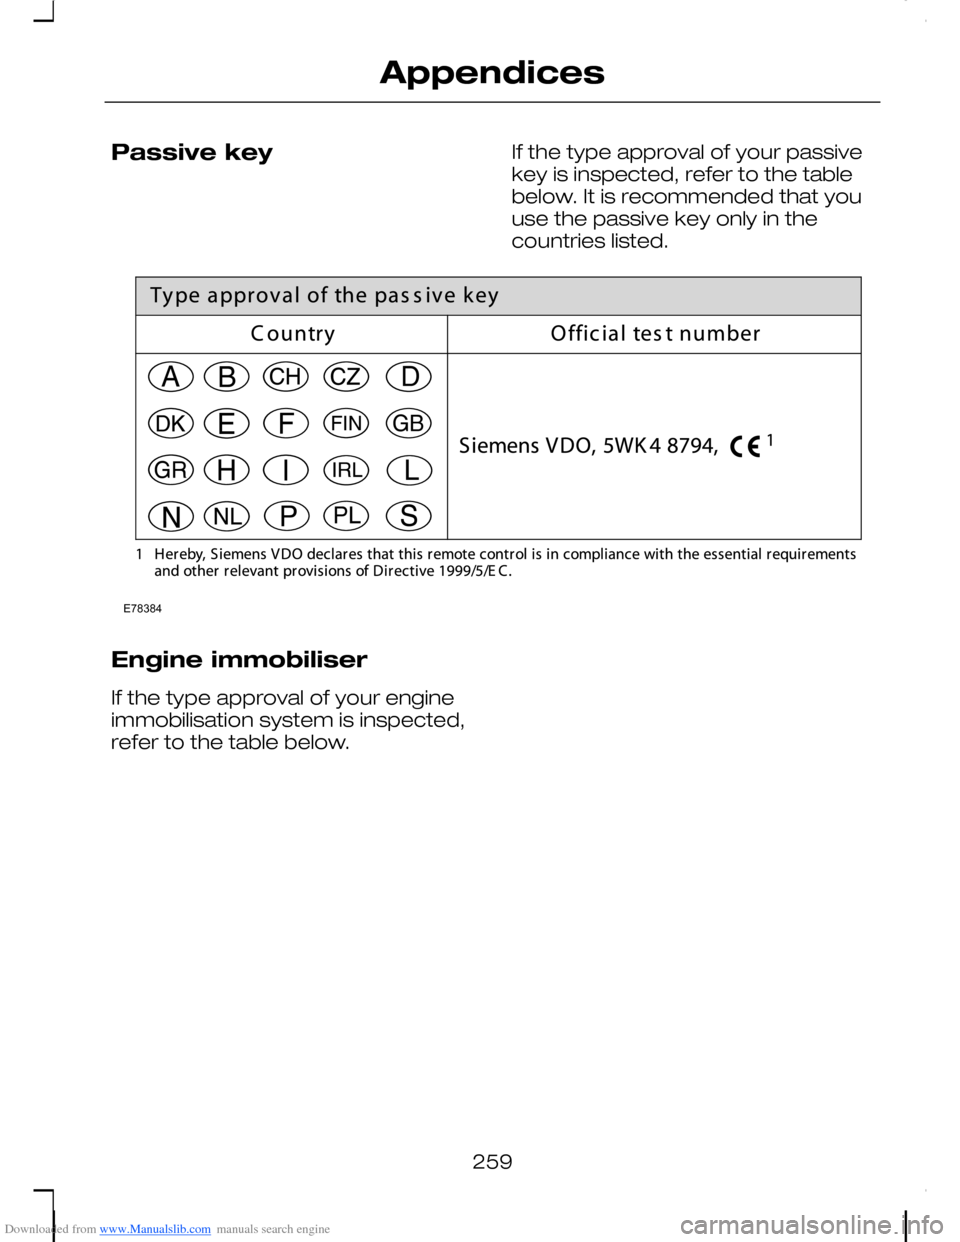 FORD C MAX 2008 1.G Owners Manual Downloaded from www.Manualslib.com manuals search engine Passive keyIf the type approval of your passivekey is inspected, refer to the tablebelow. It is recommended that youuse the passive key only in